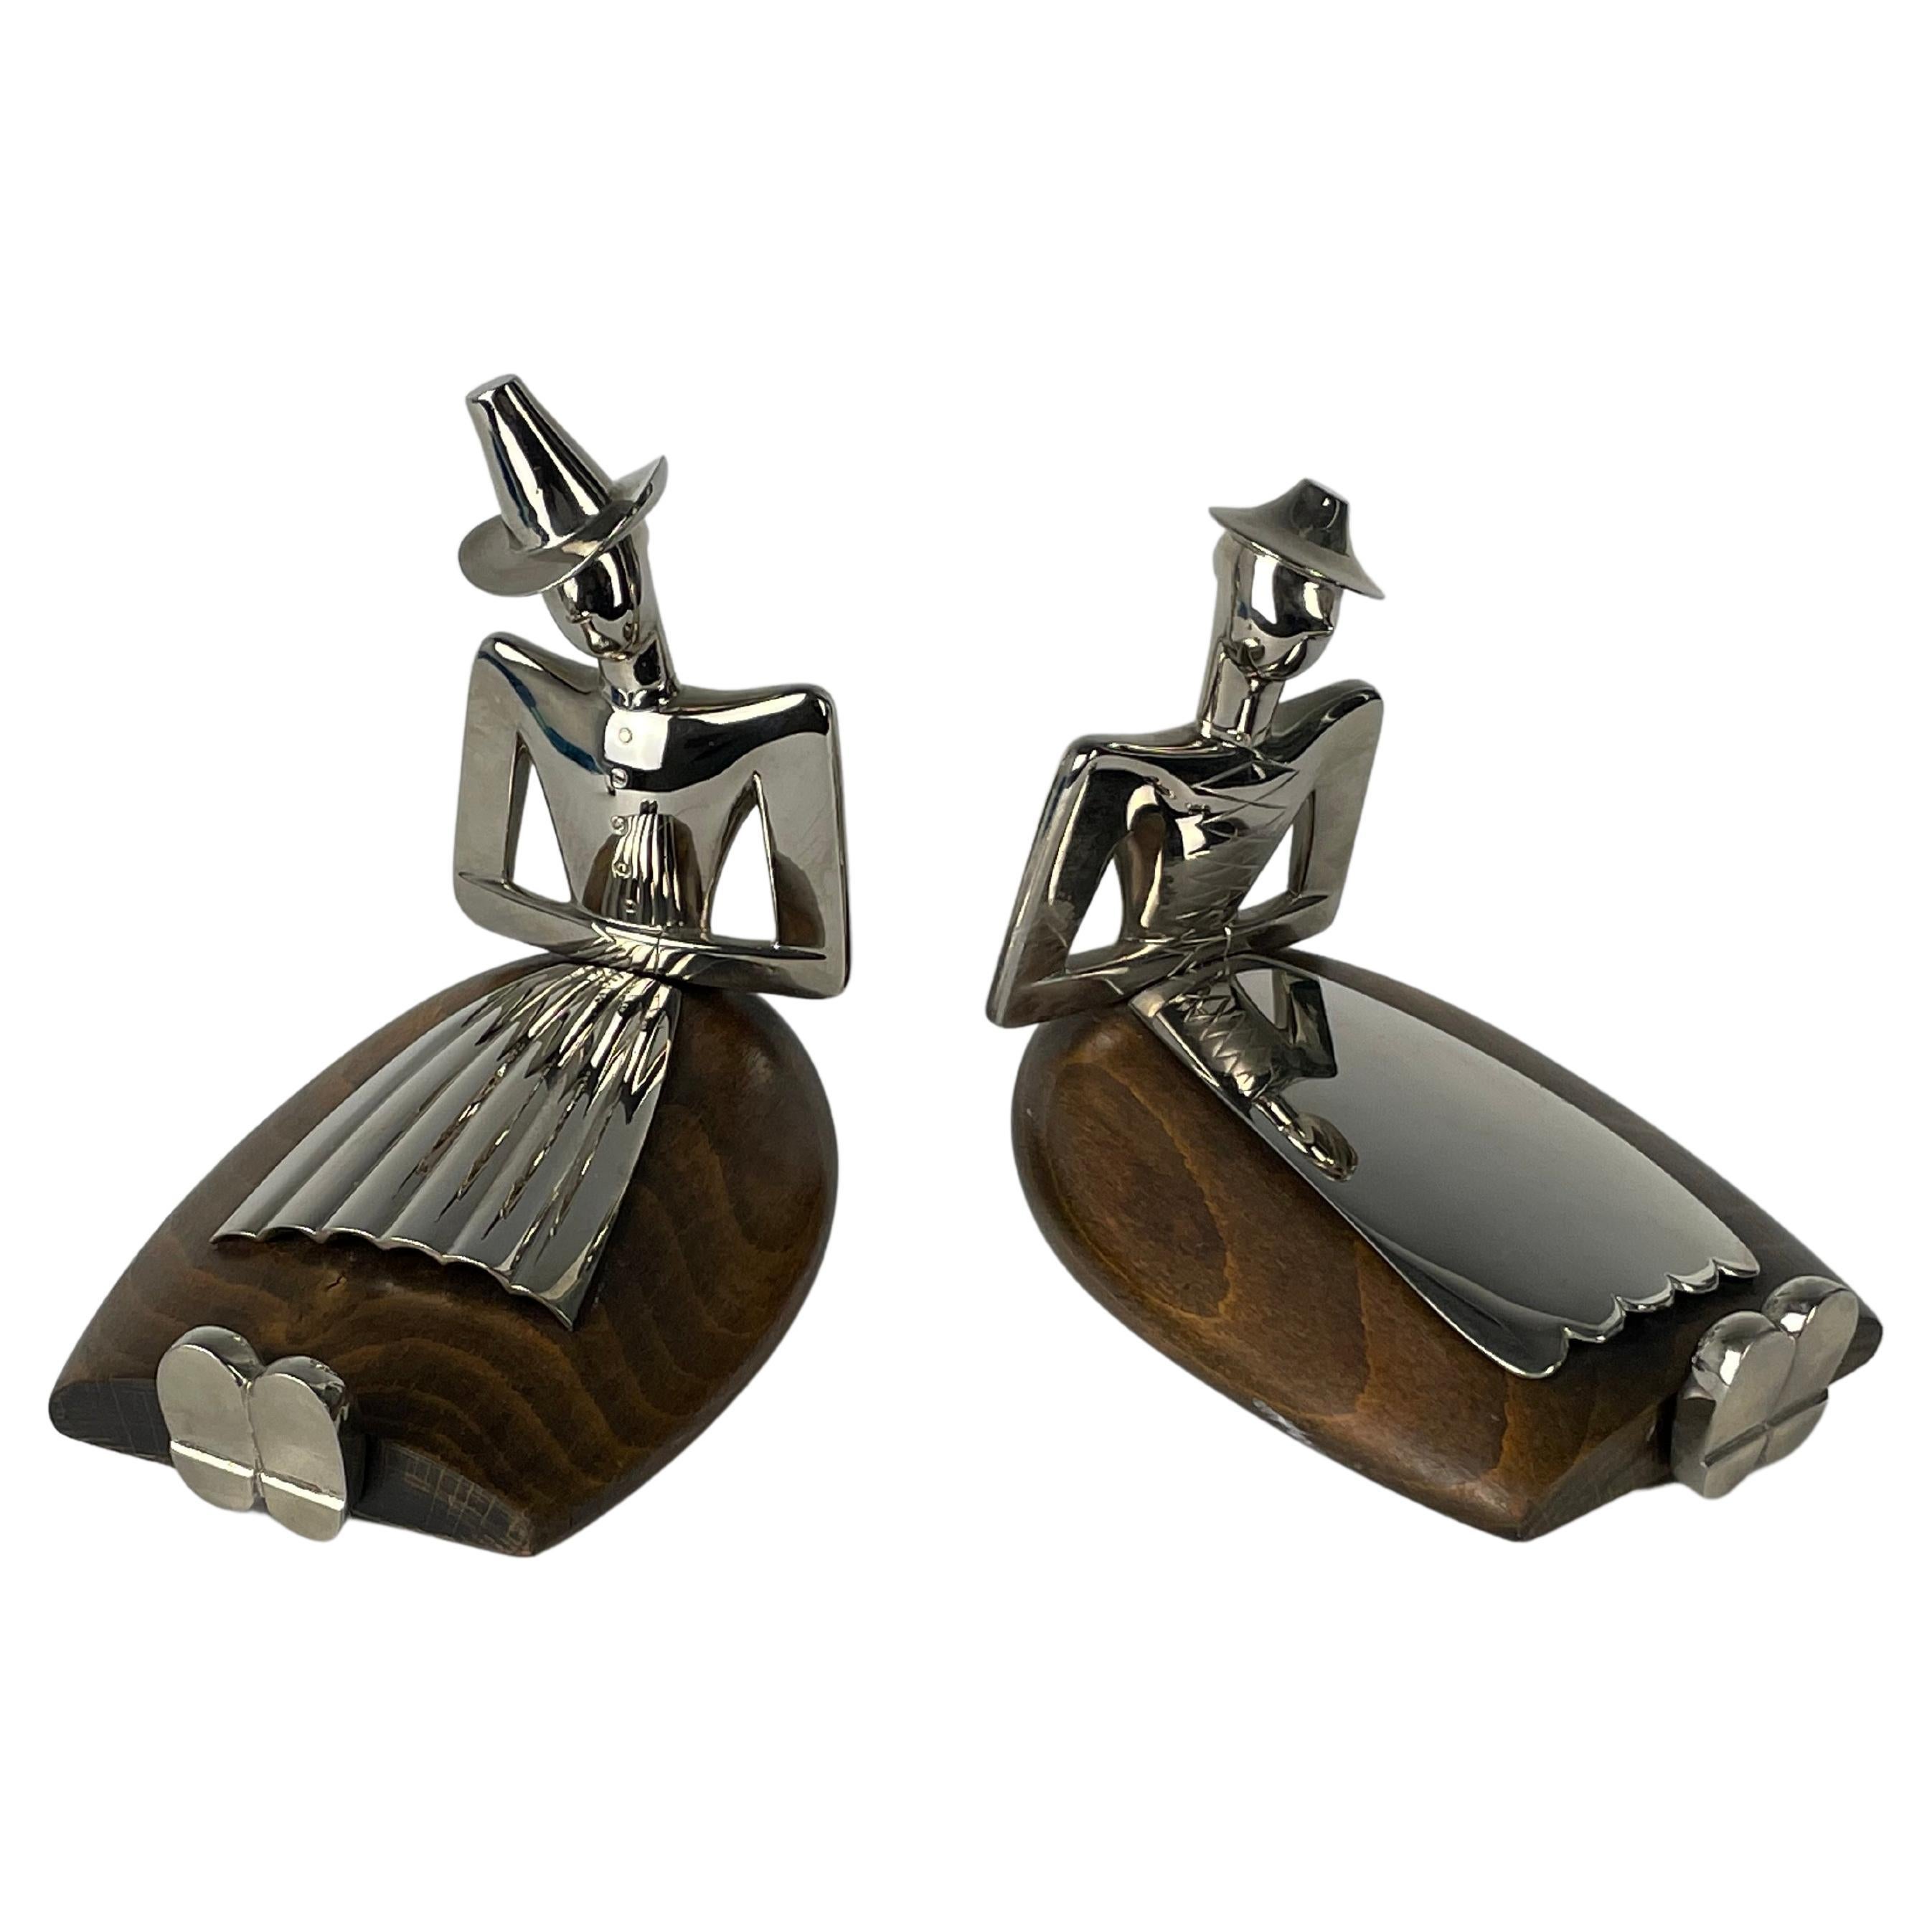 Art Deco Bookends by Hagenauer